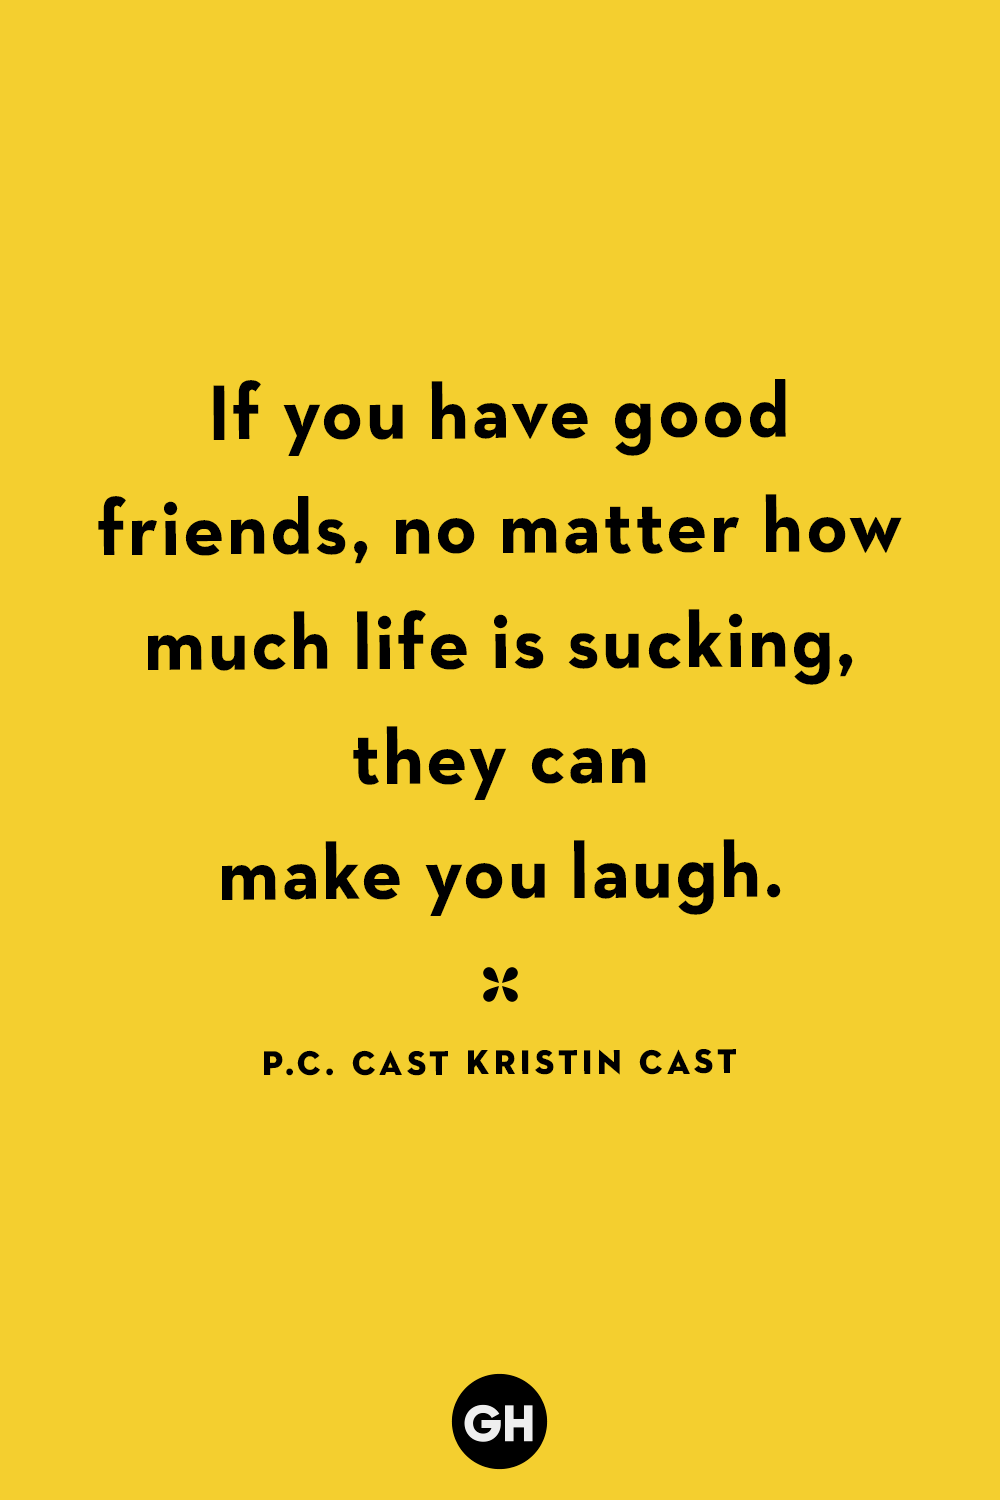 quotes to make you smile and laugh